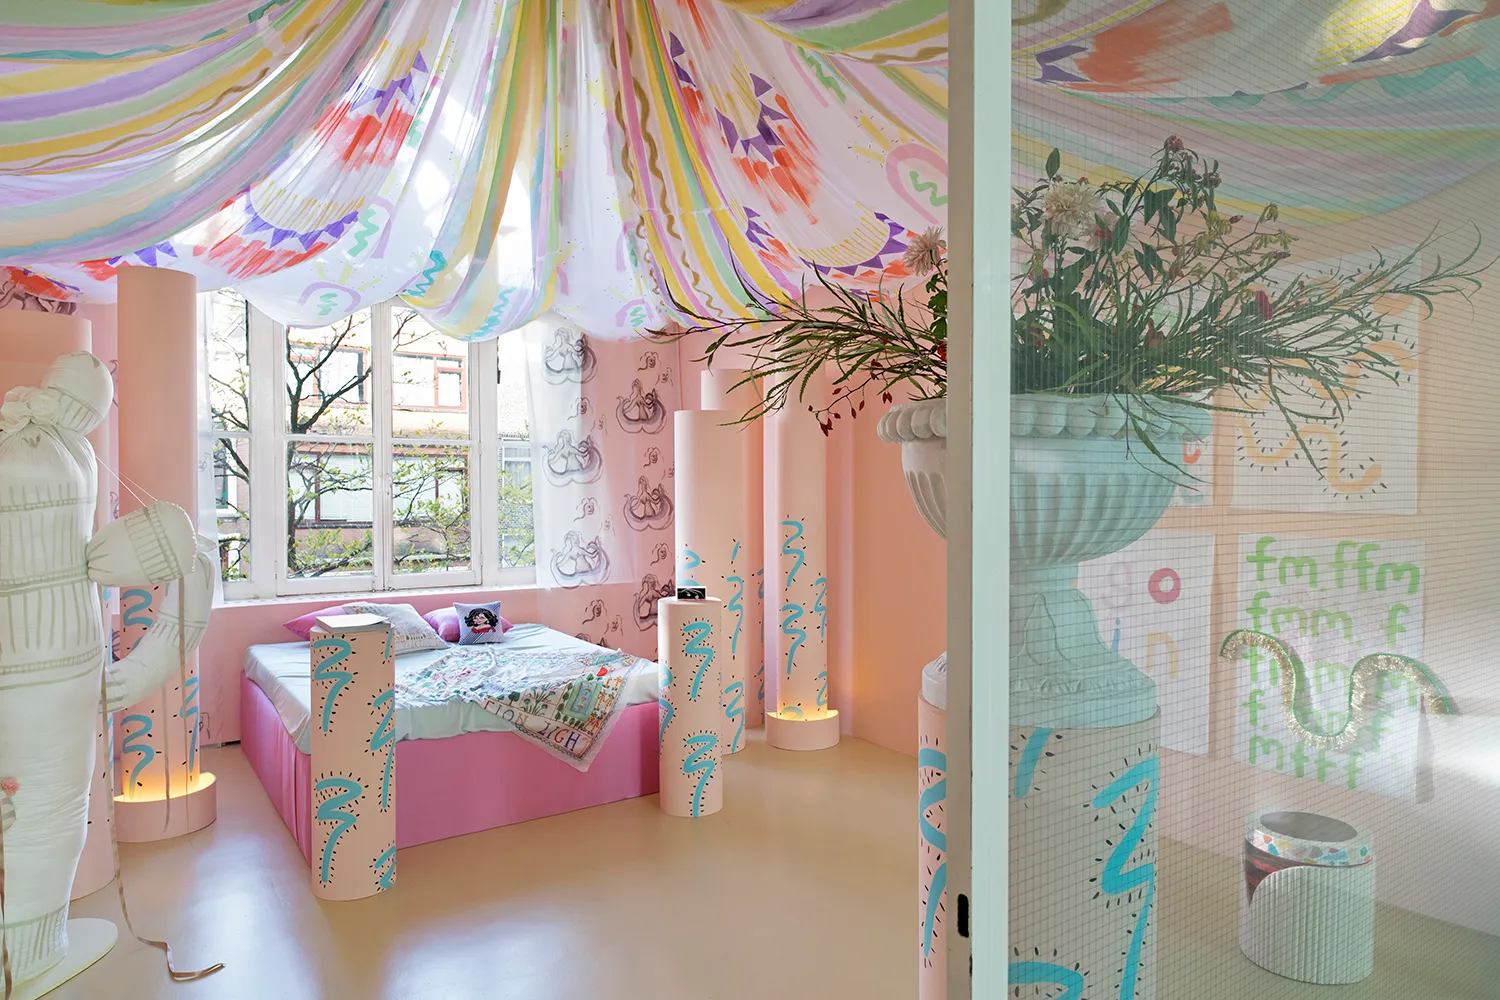 A flamboyant pink room with a bed, painted columns, flowers and draping hanging from the ceiling